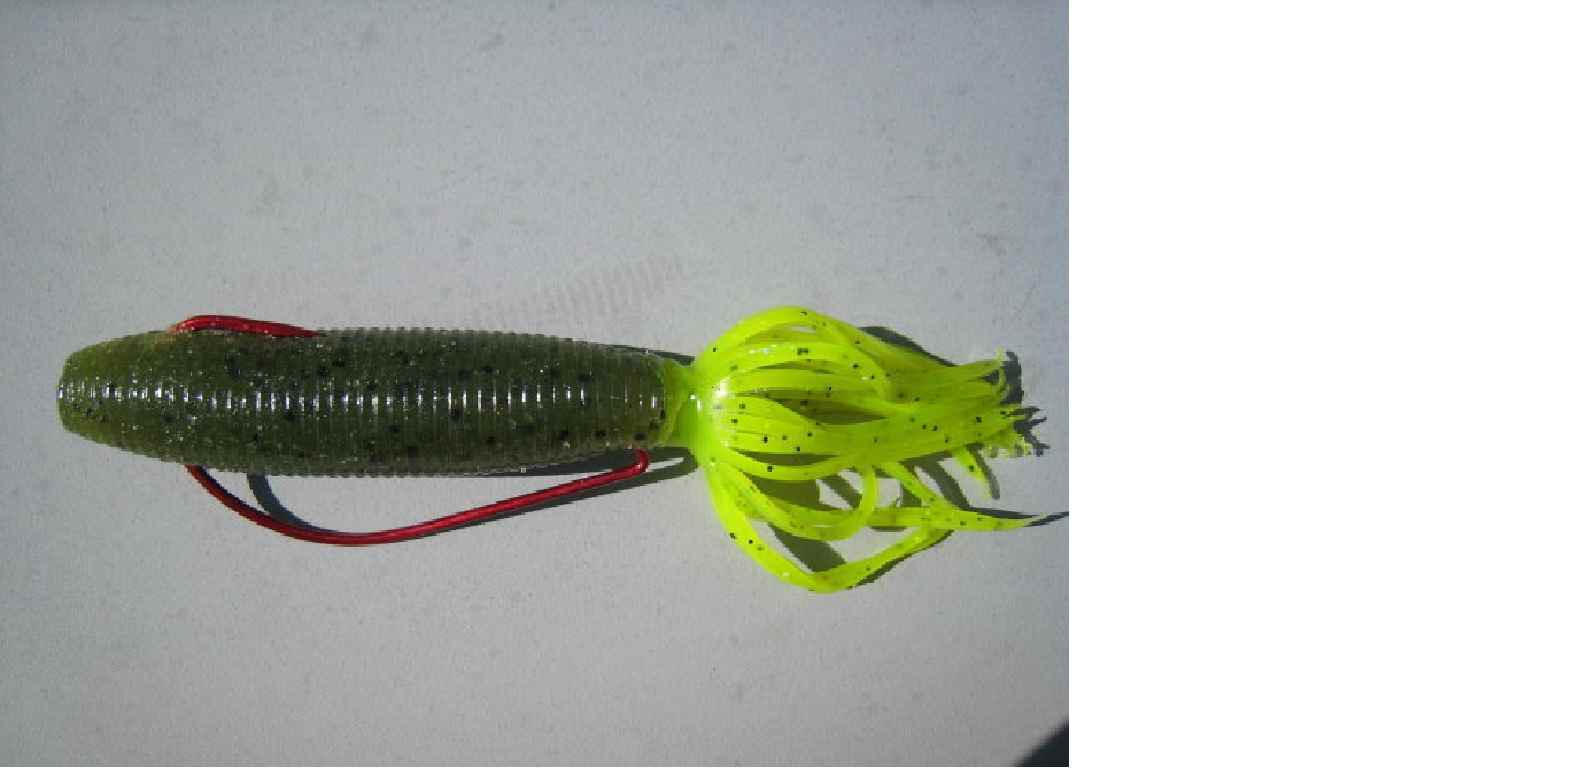 Discontinued lures that you wish would come back - Fishing Tackle